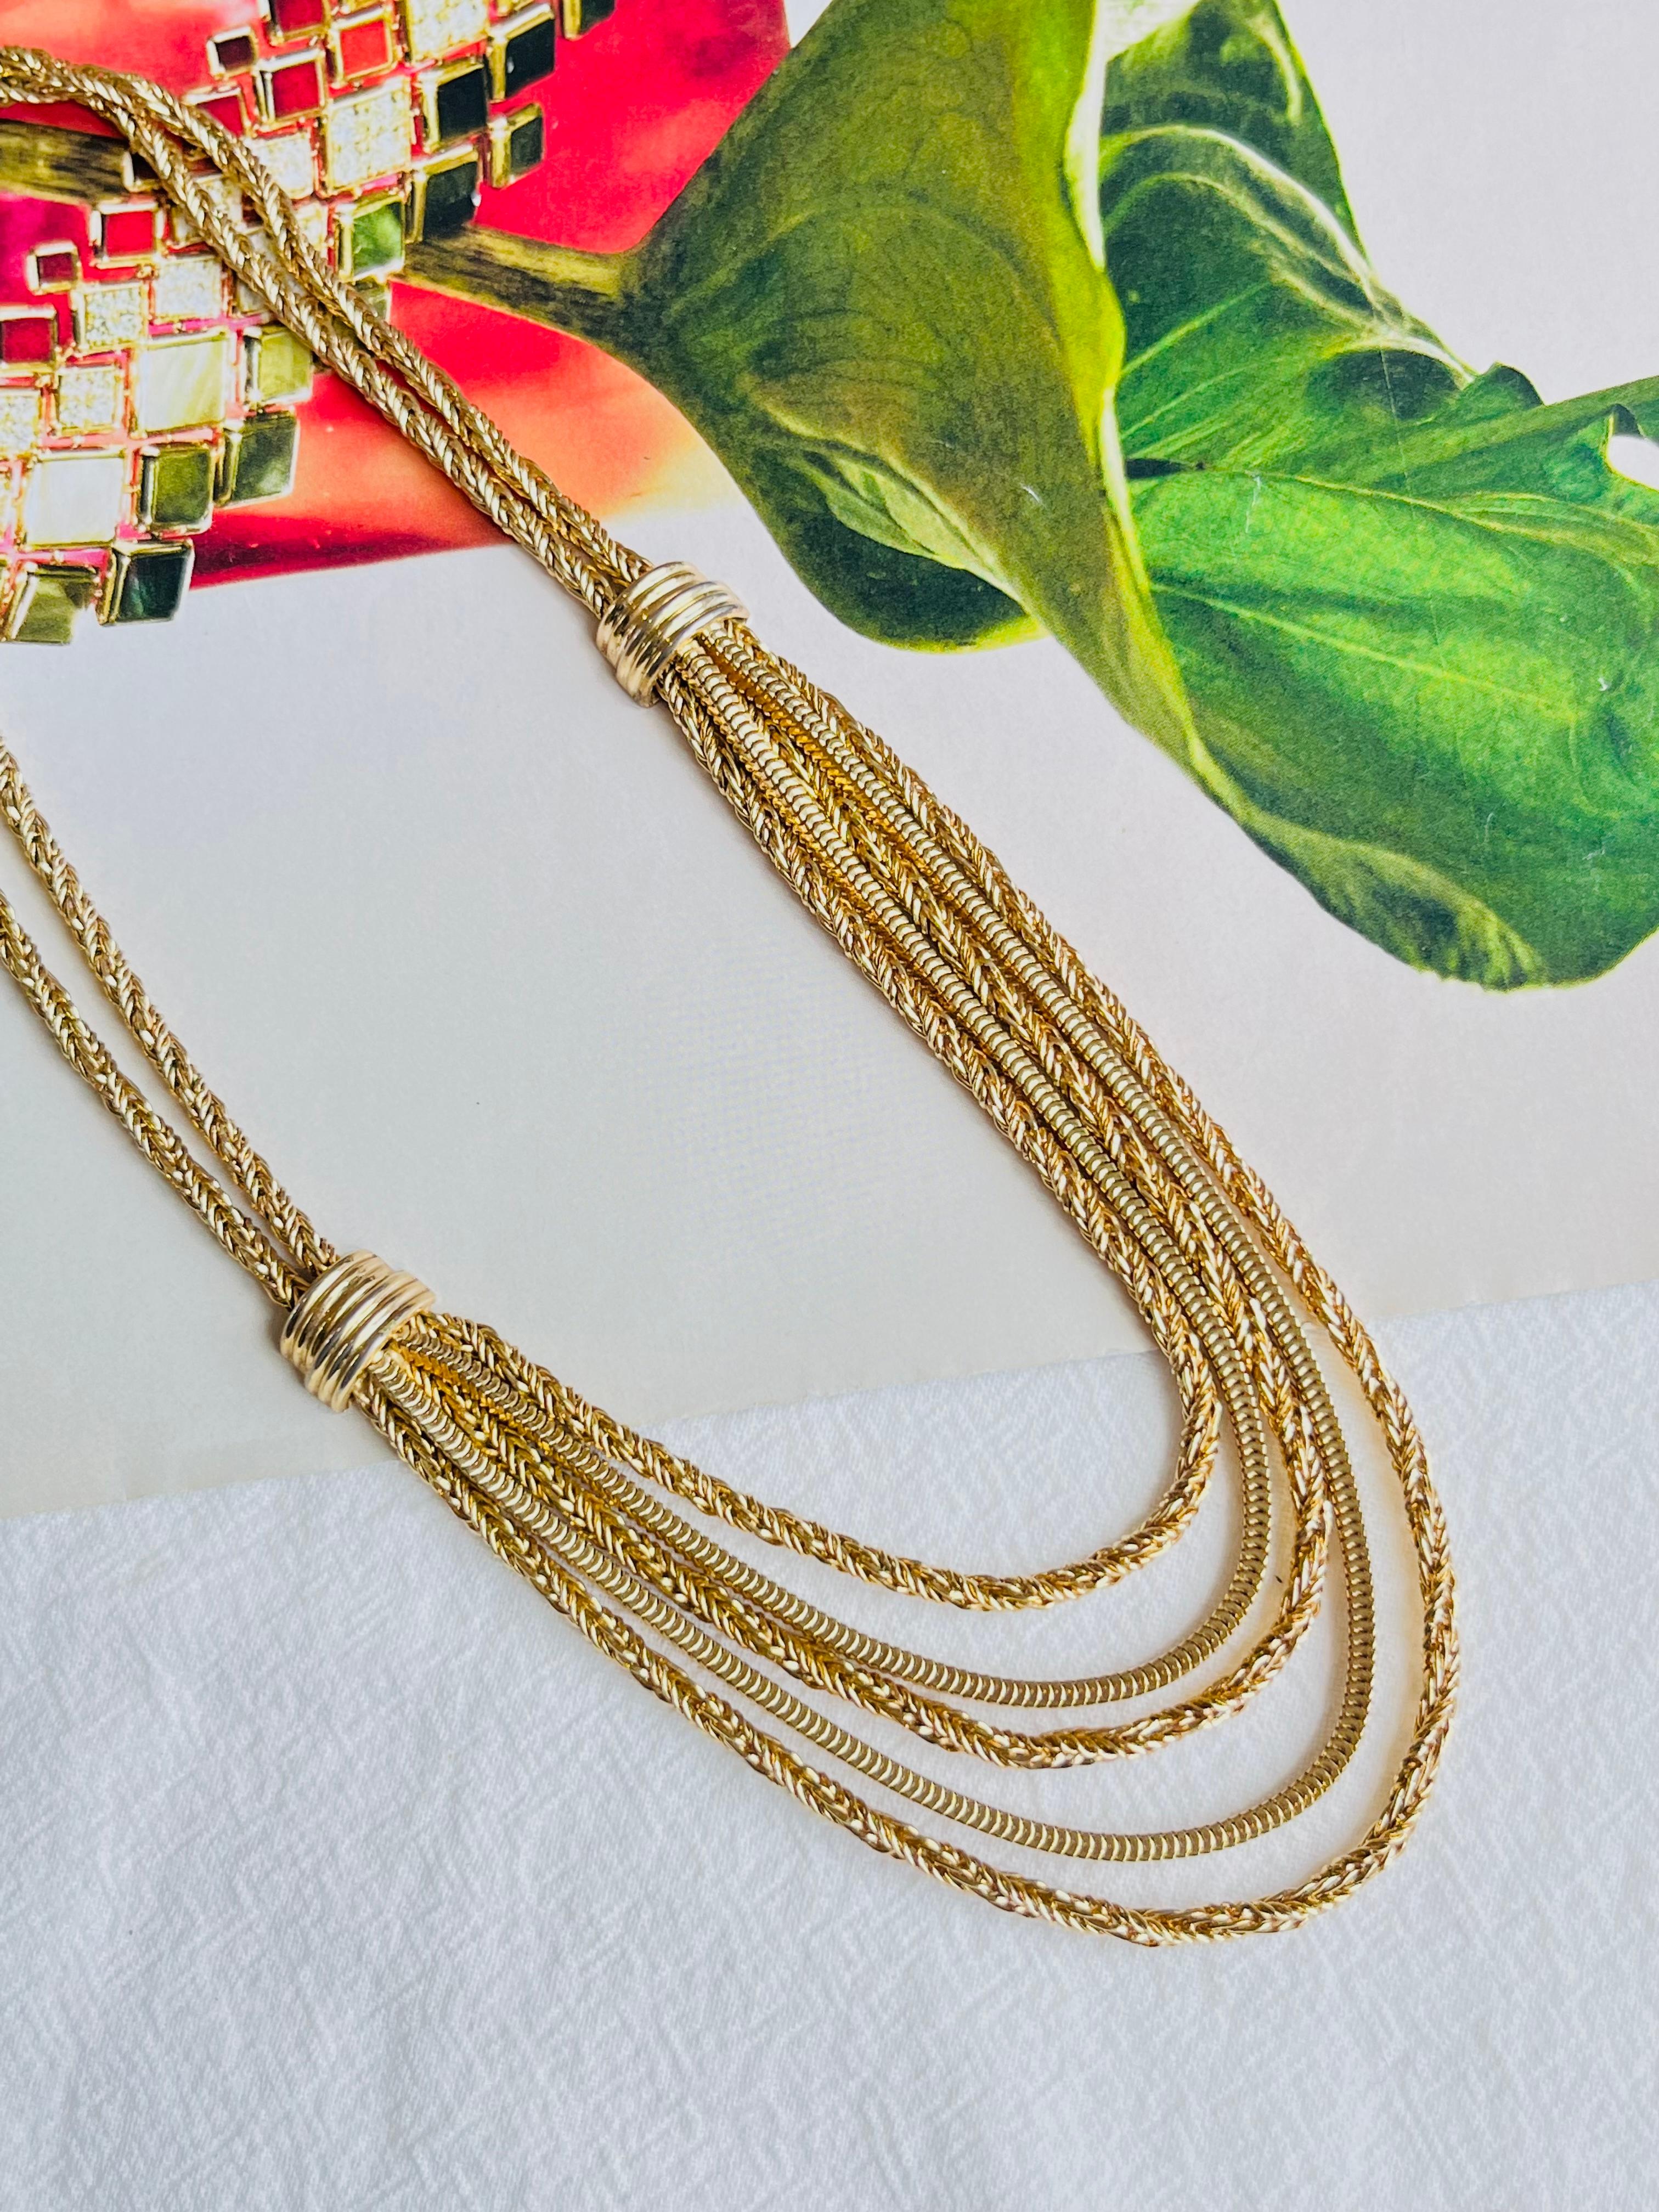 Christian Dior GROSSE 1961 Vintage Double 5 Strand Layer Rope Snake Necklace In Excellent Condition For Sale In Wokingham, England